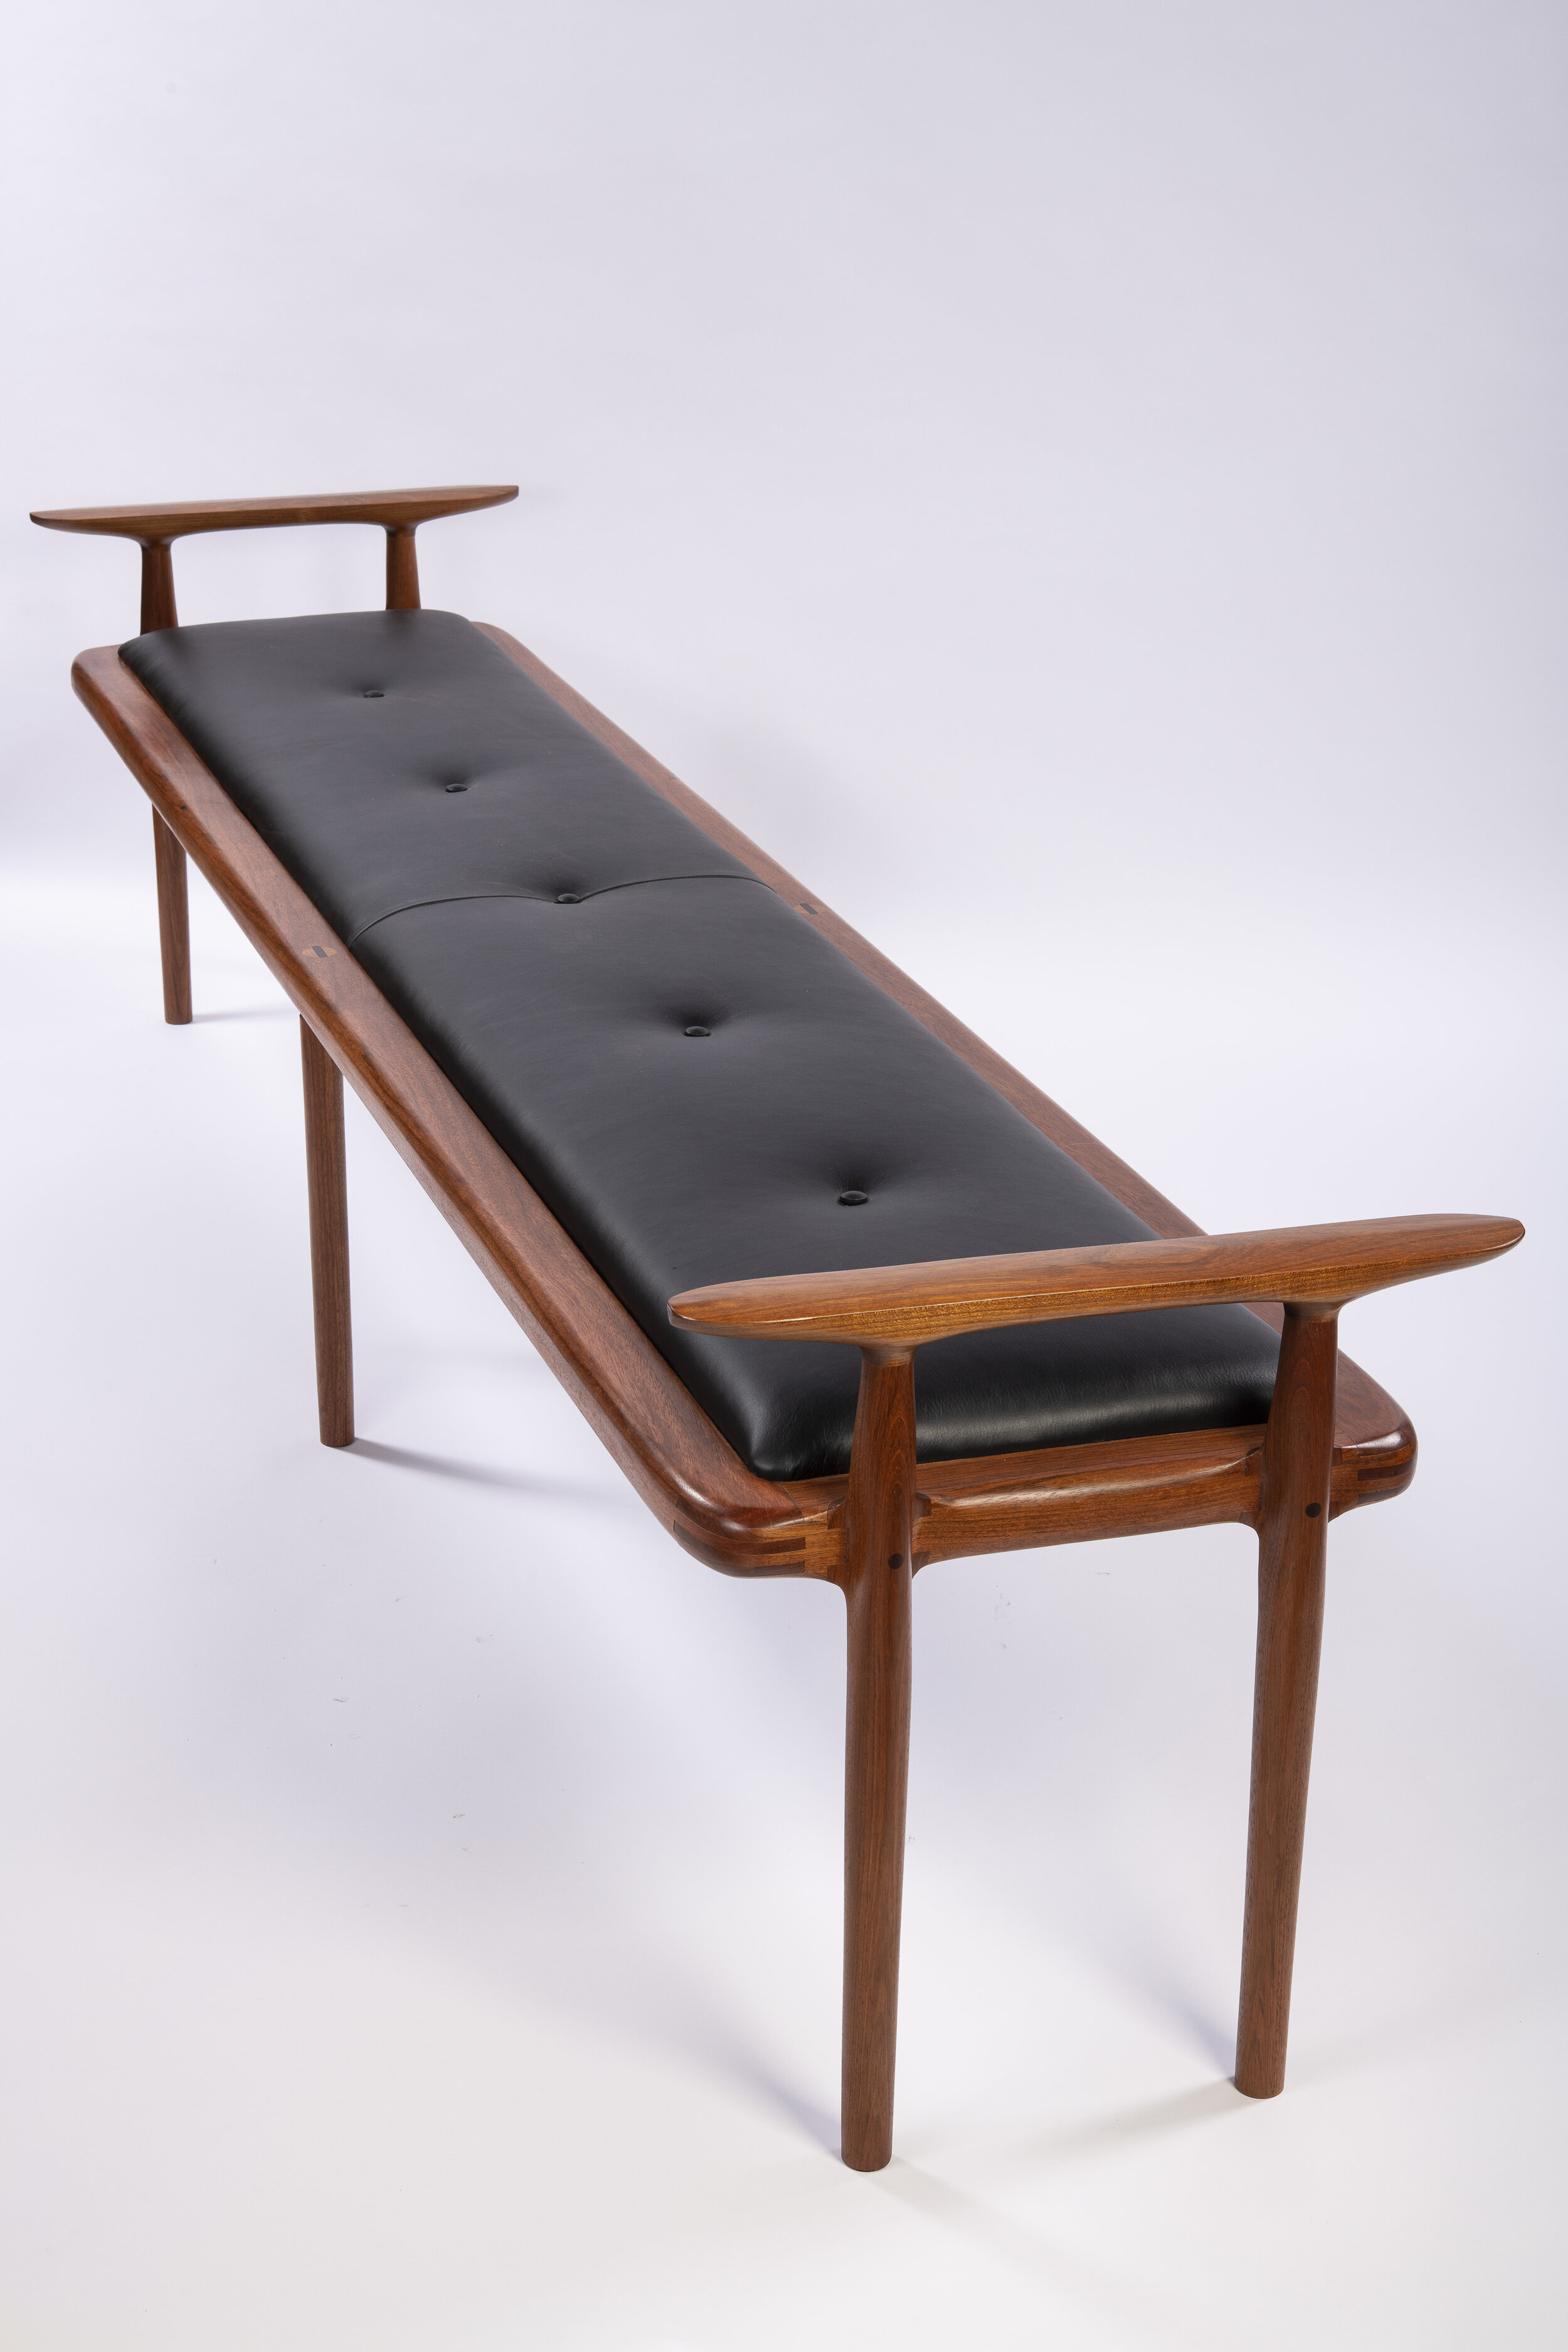 8 Ft Sculpted Bench (Jatoba & Leather)